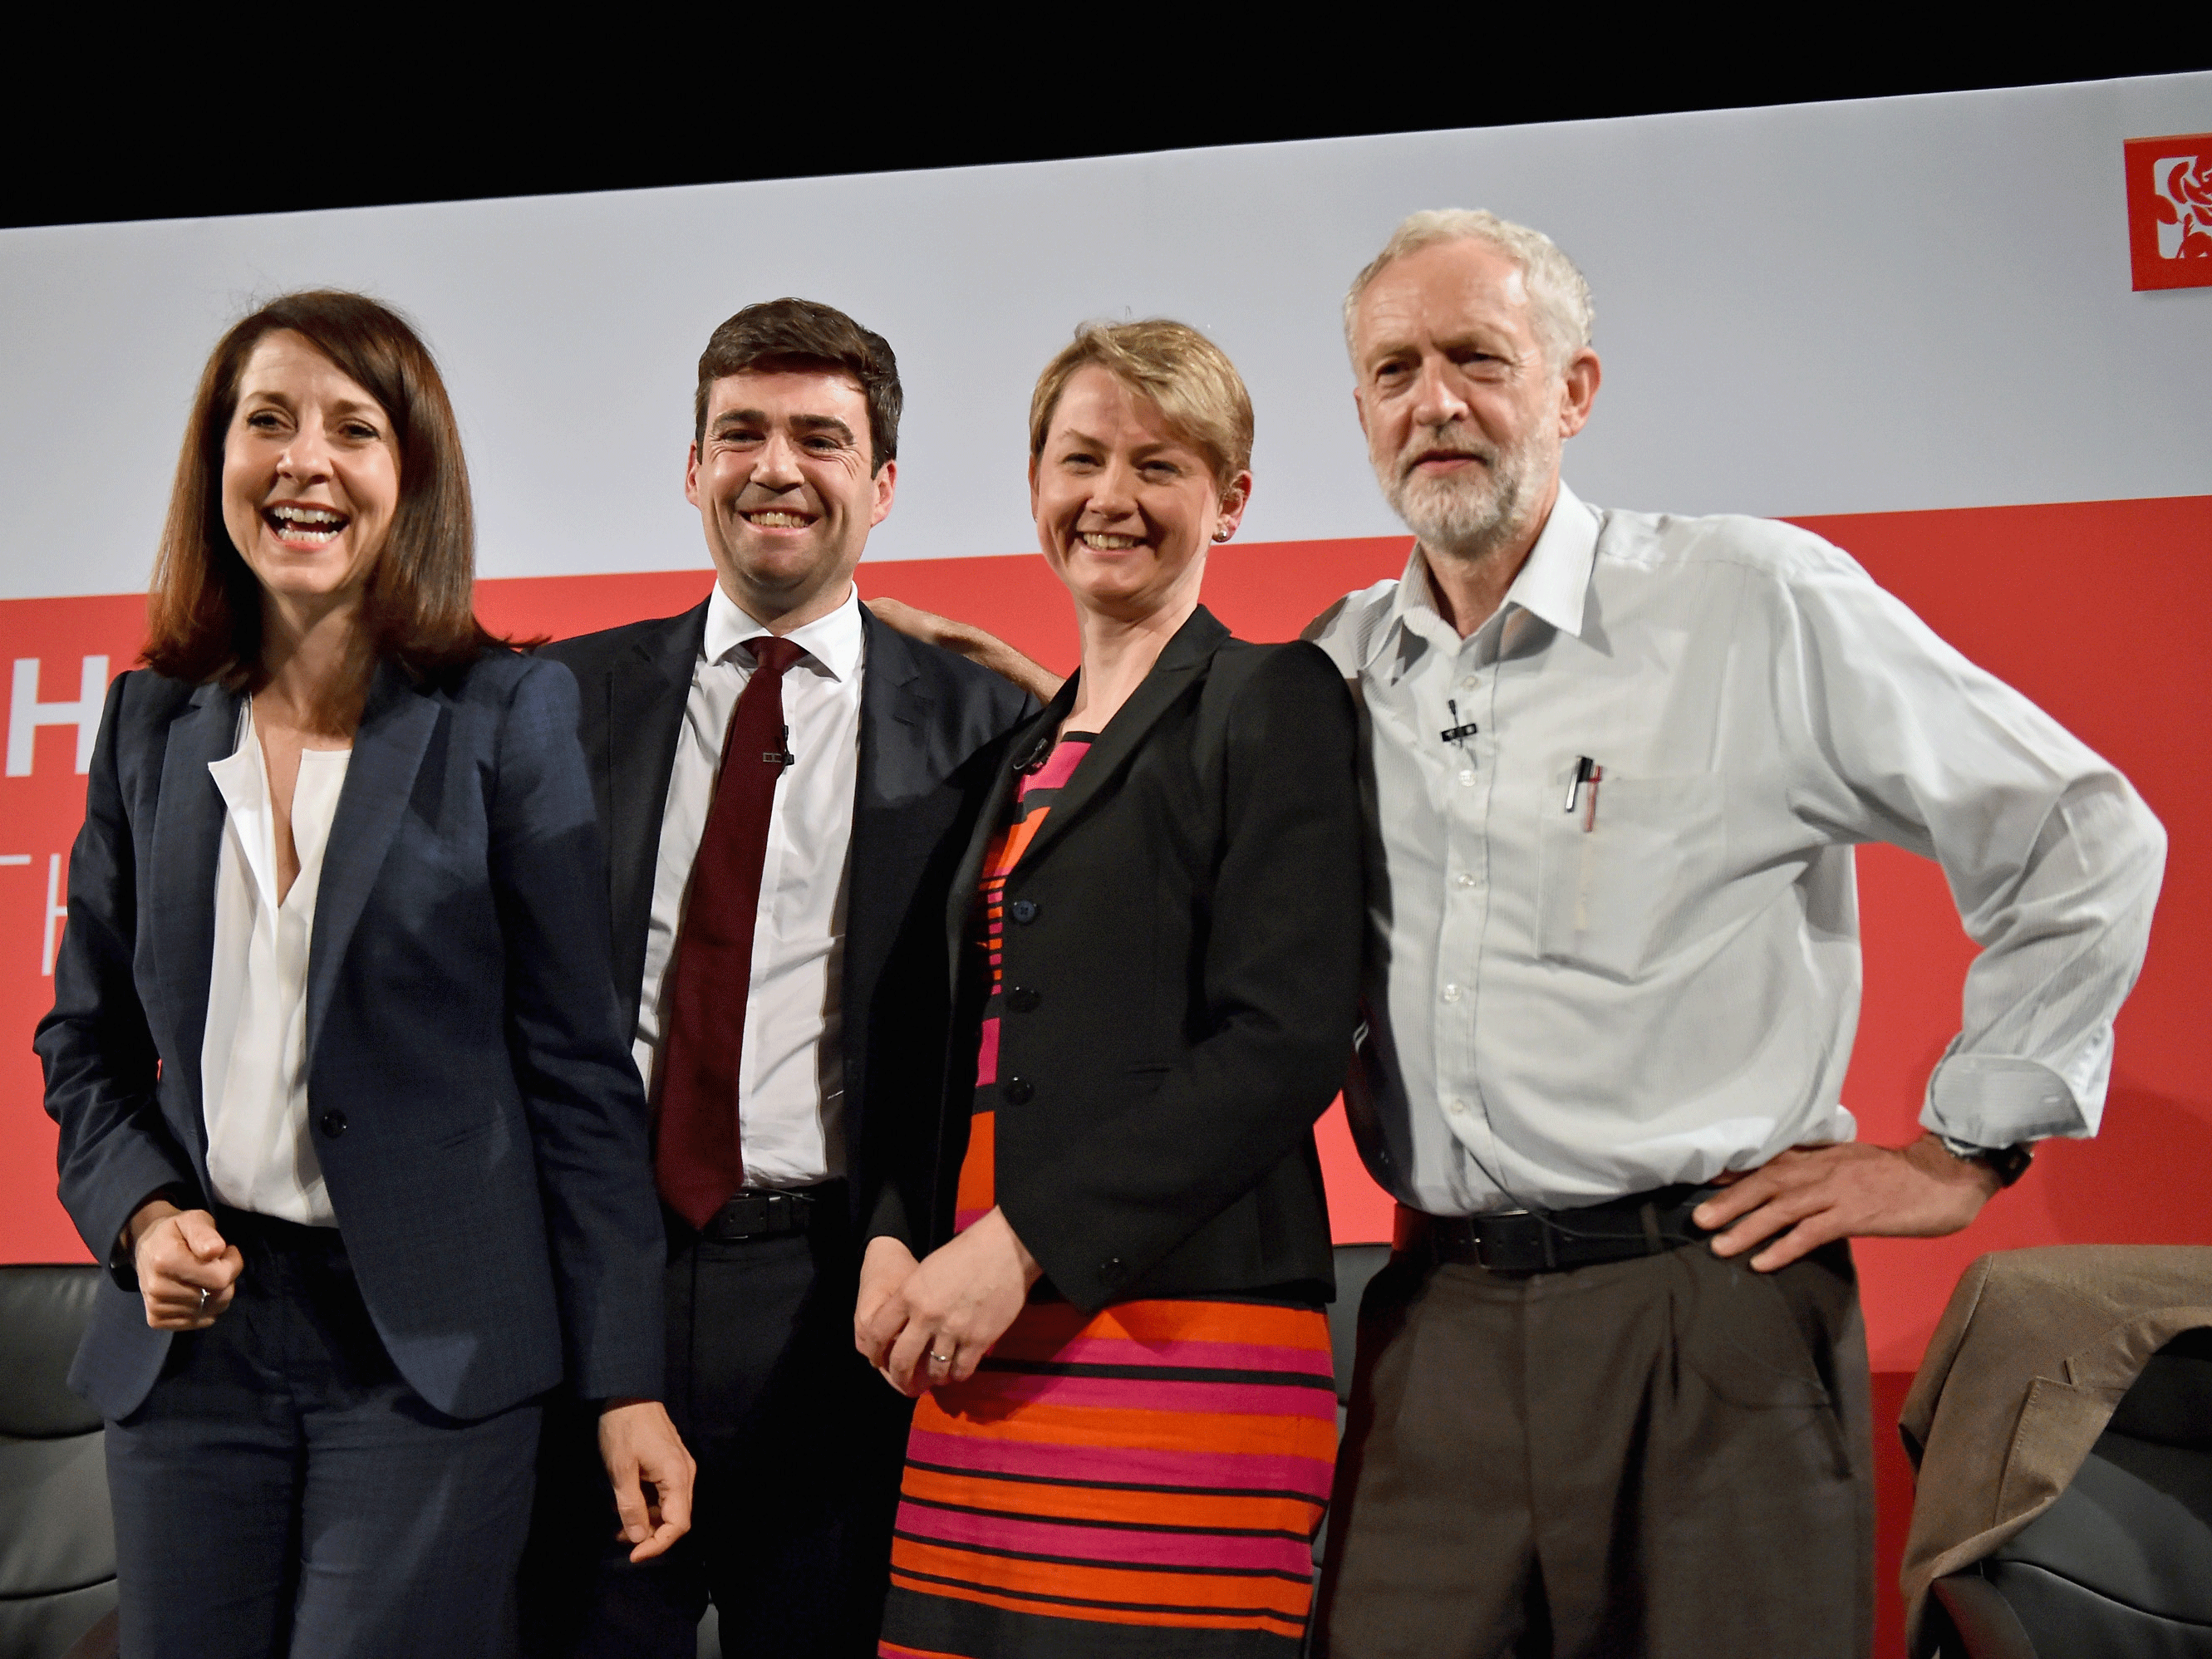 The Labour leadership contenders